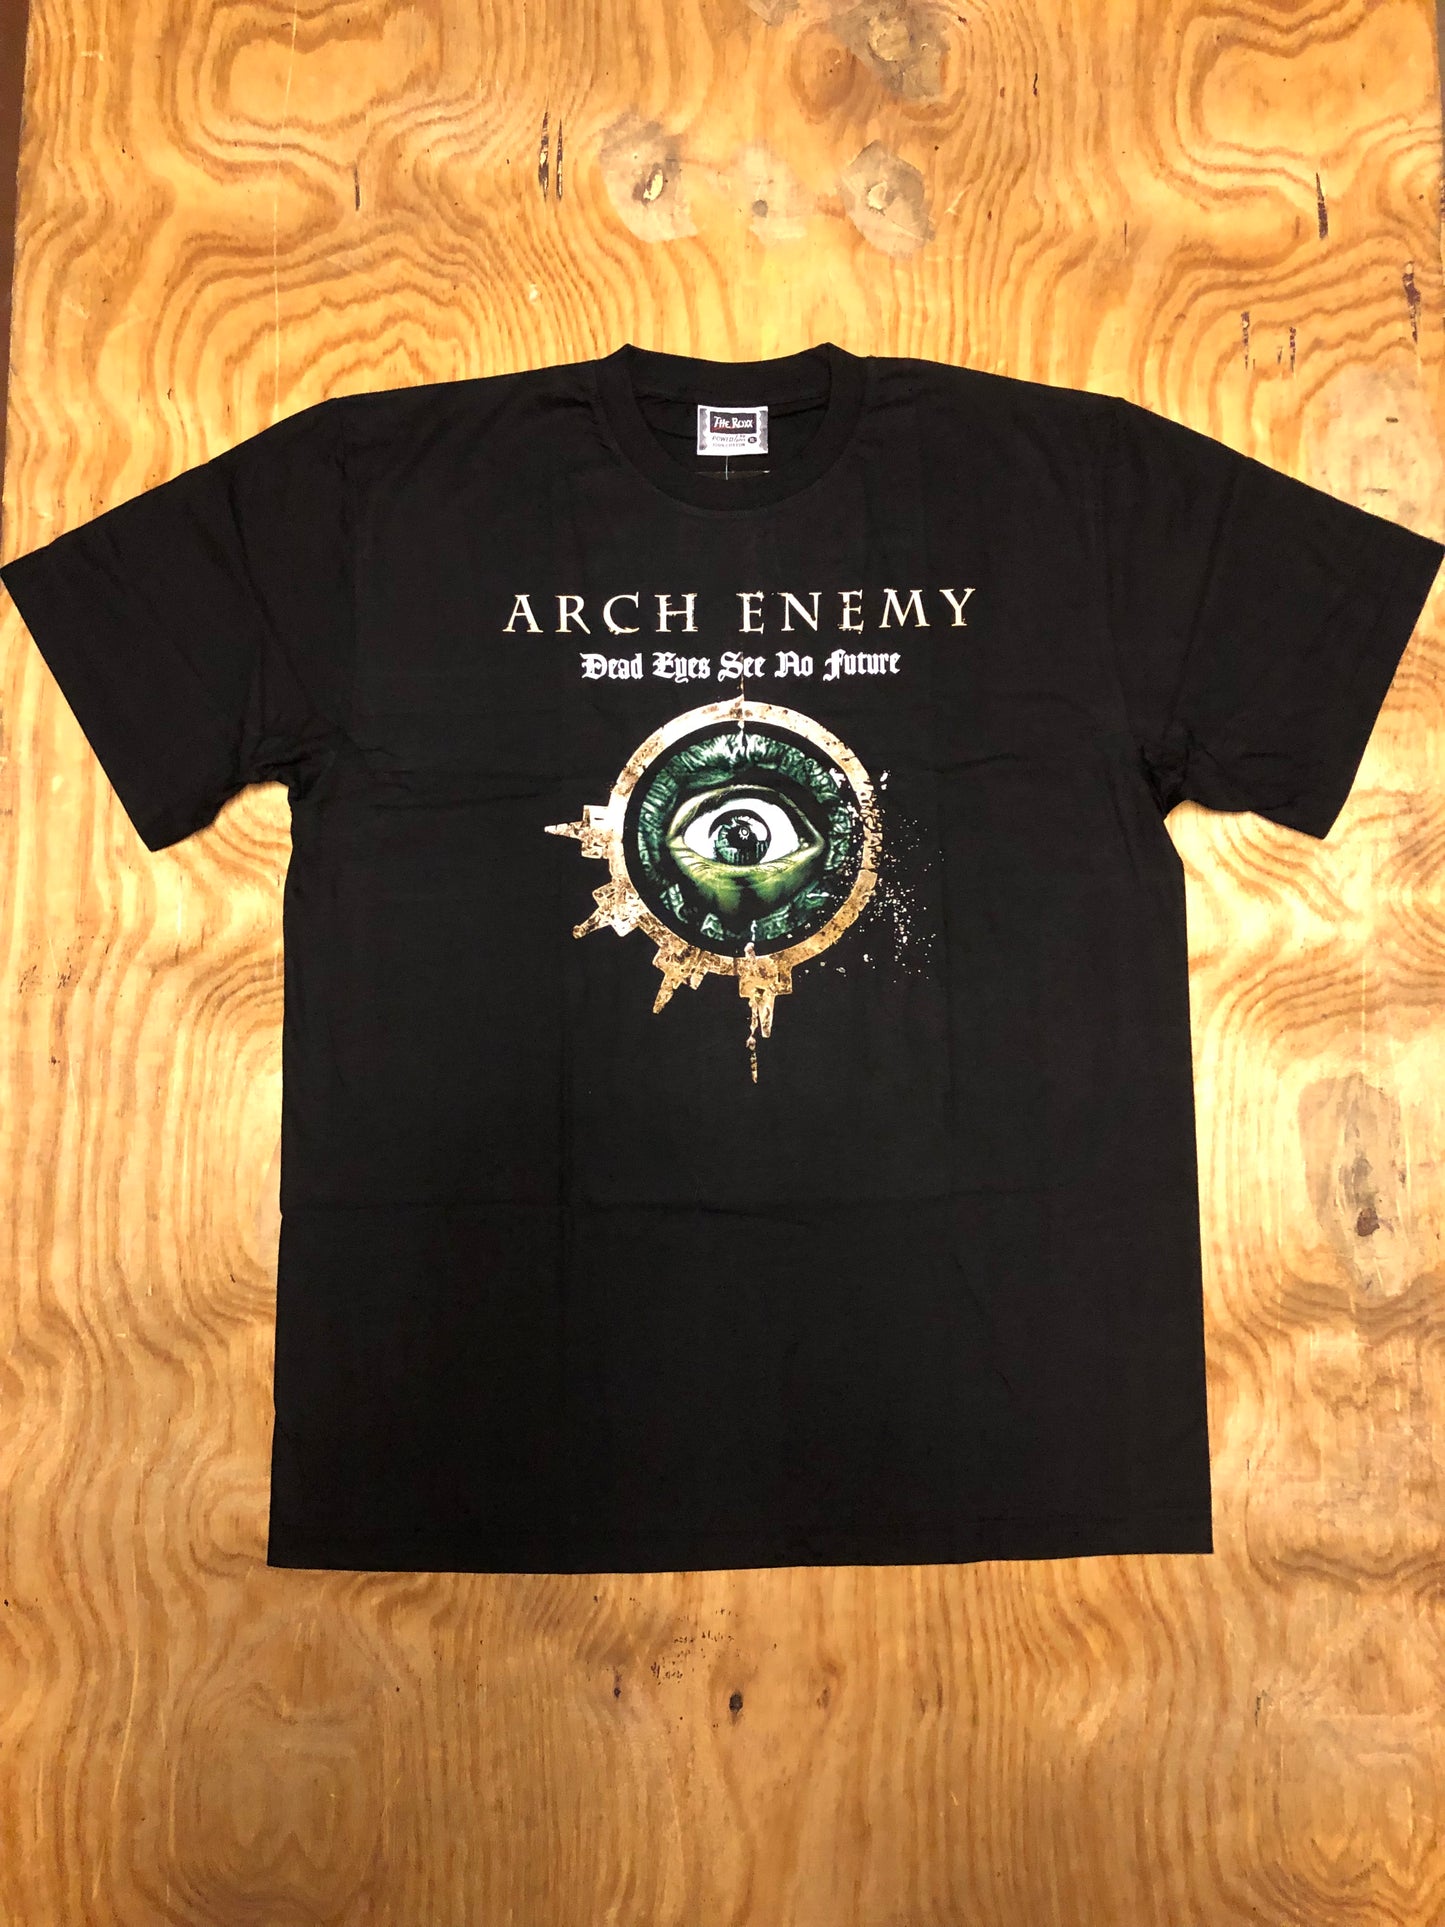 RCK279 - Arch Enemy - Dead eyes see no Future